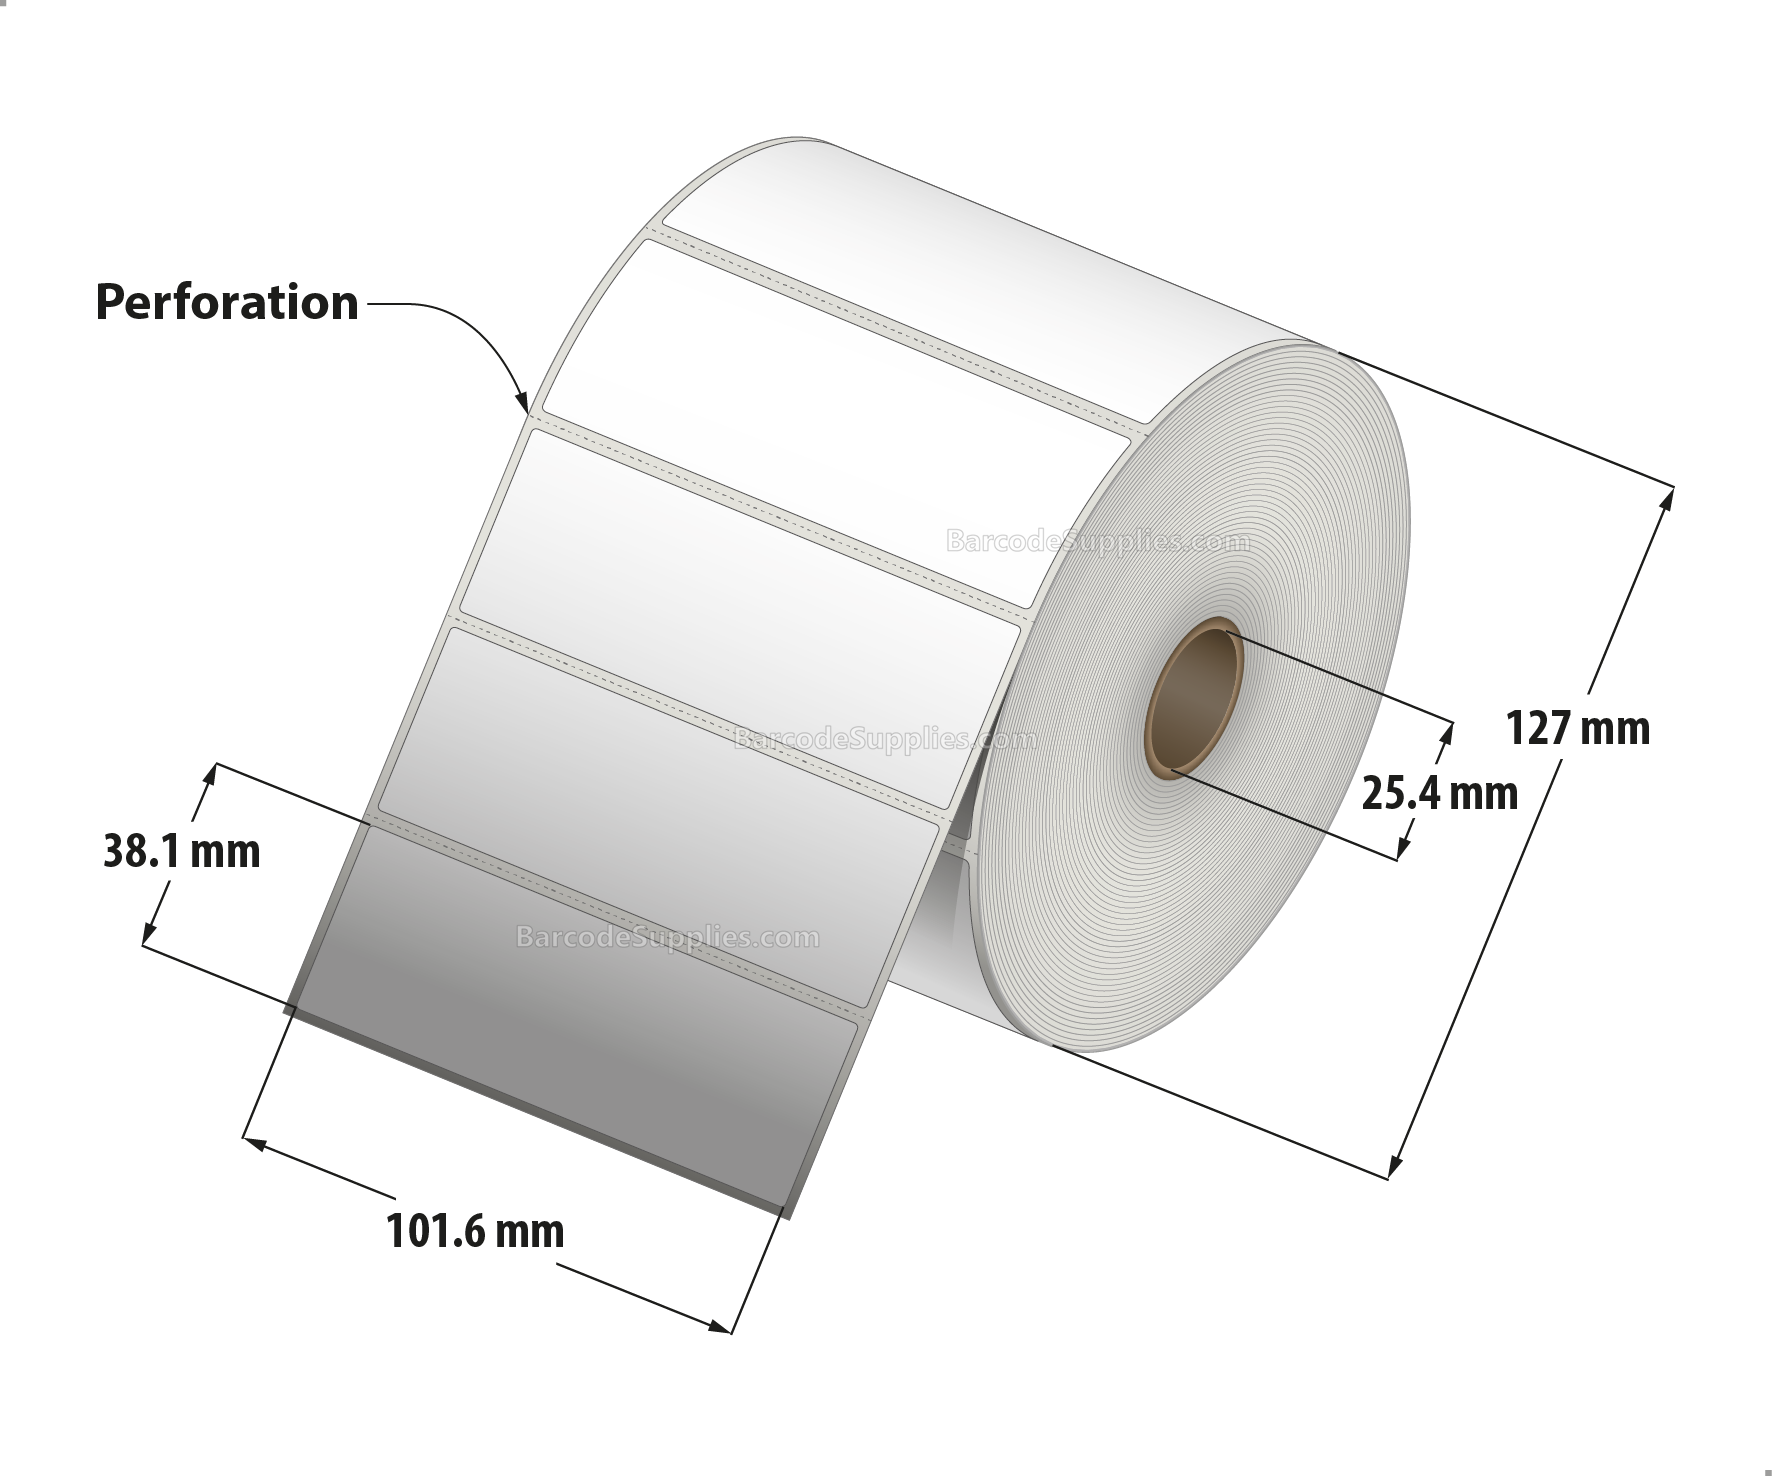 4 x 1.5 Direct Thermal White Labels With Permanent Acrylic Adhesive - Perforated - 1620 Labels Per Roll - Carton Of 4 Rolls - 6480 Labels Total - MPN: DT415-15PDT